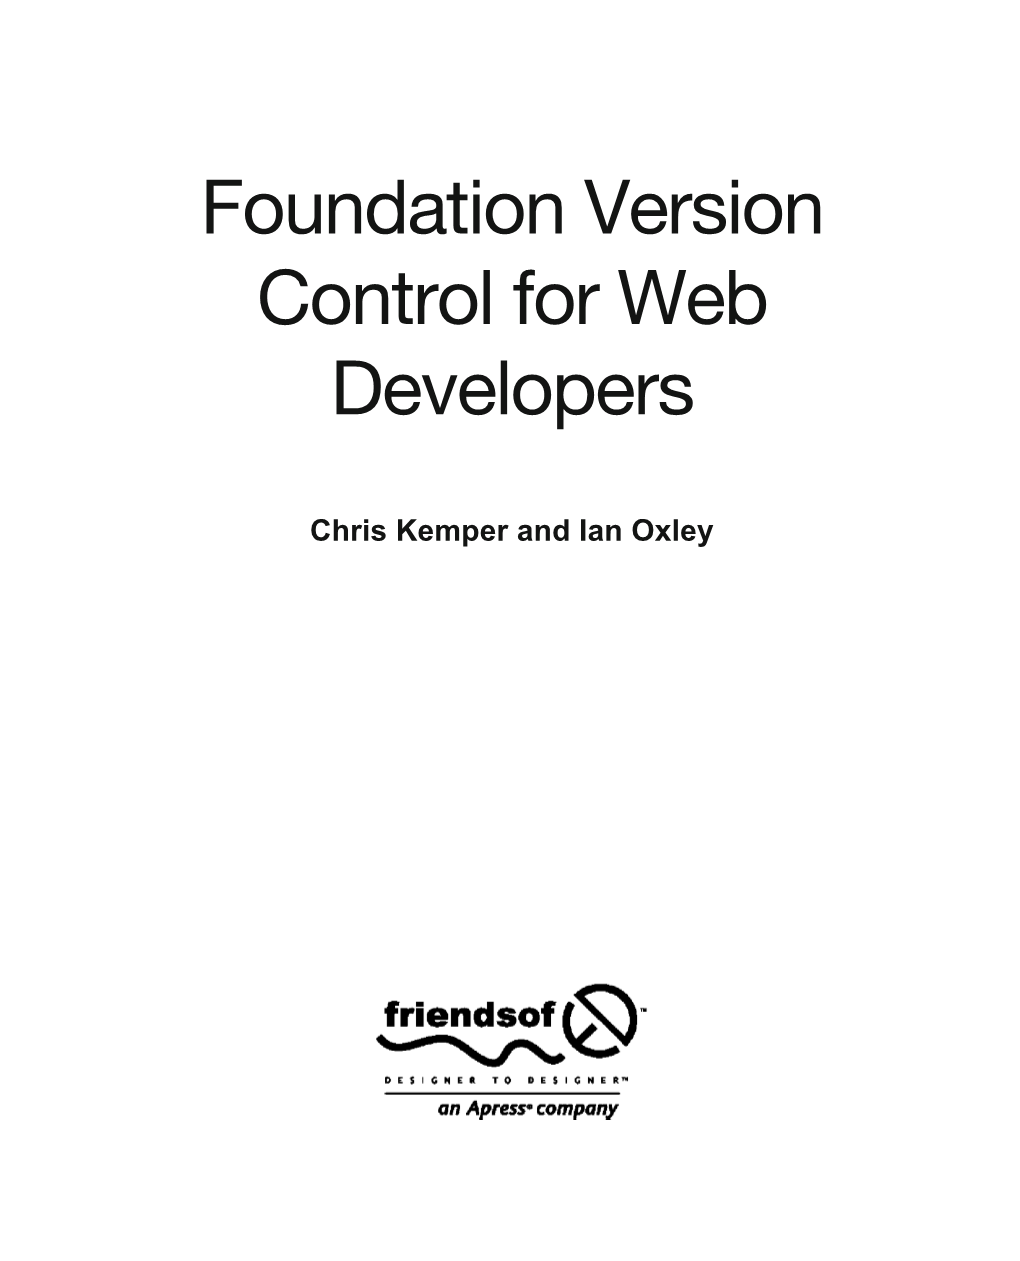 Foundation Version Control for Web Developers